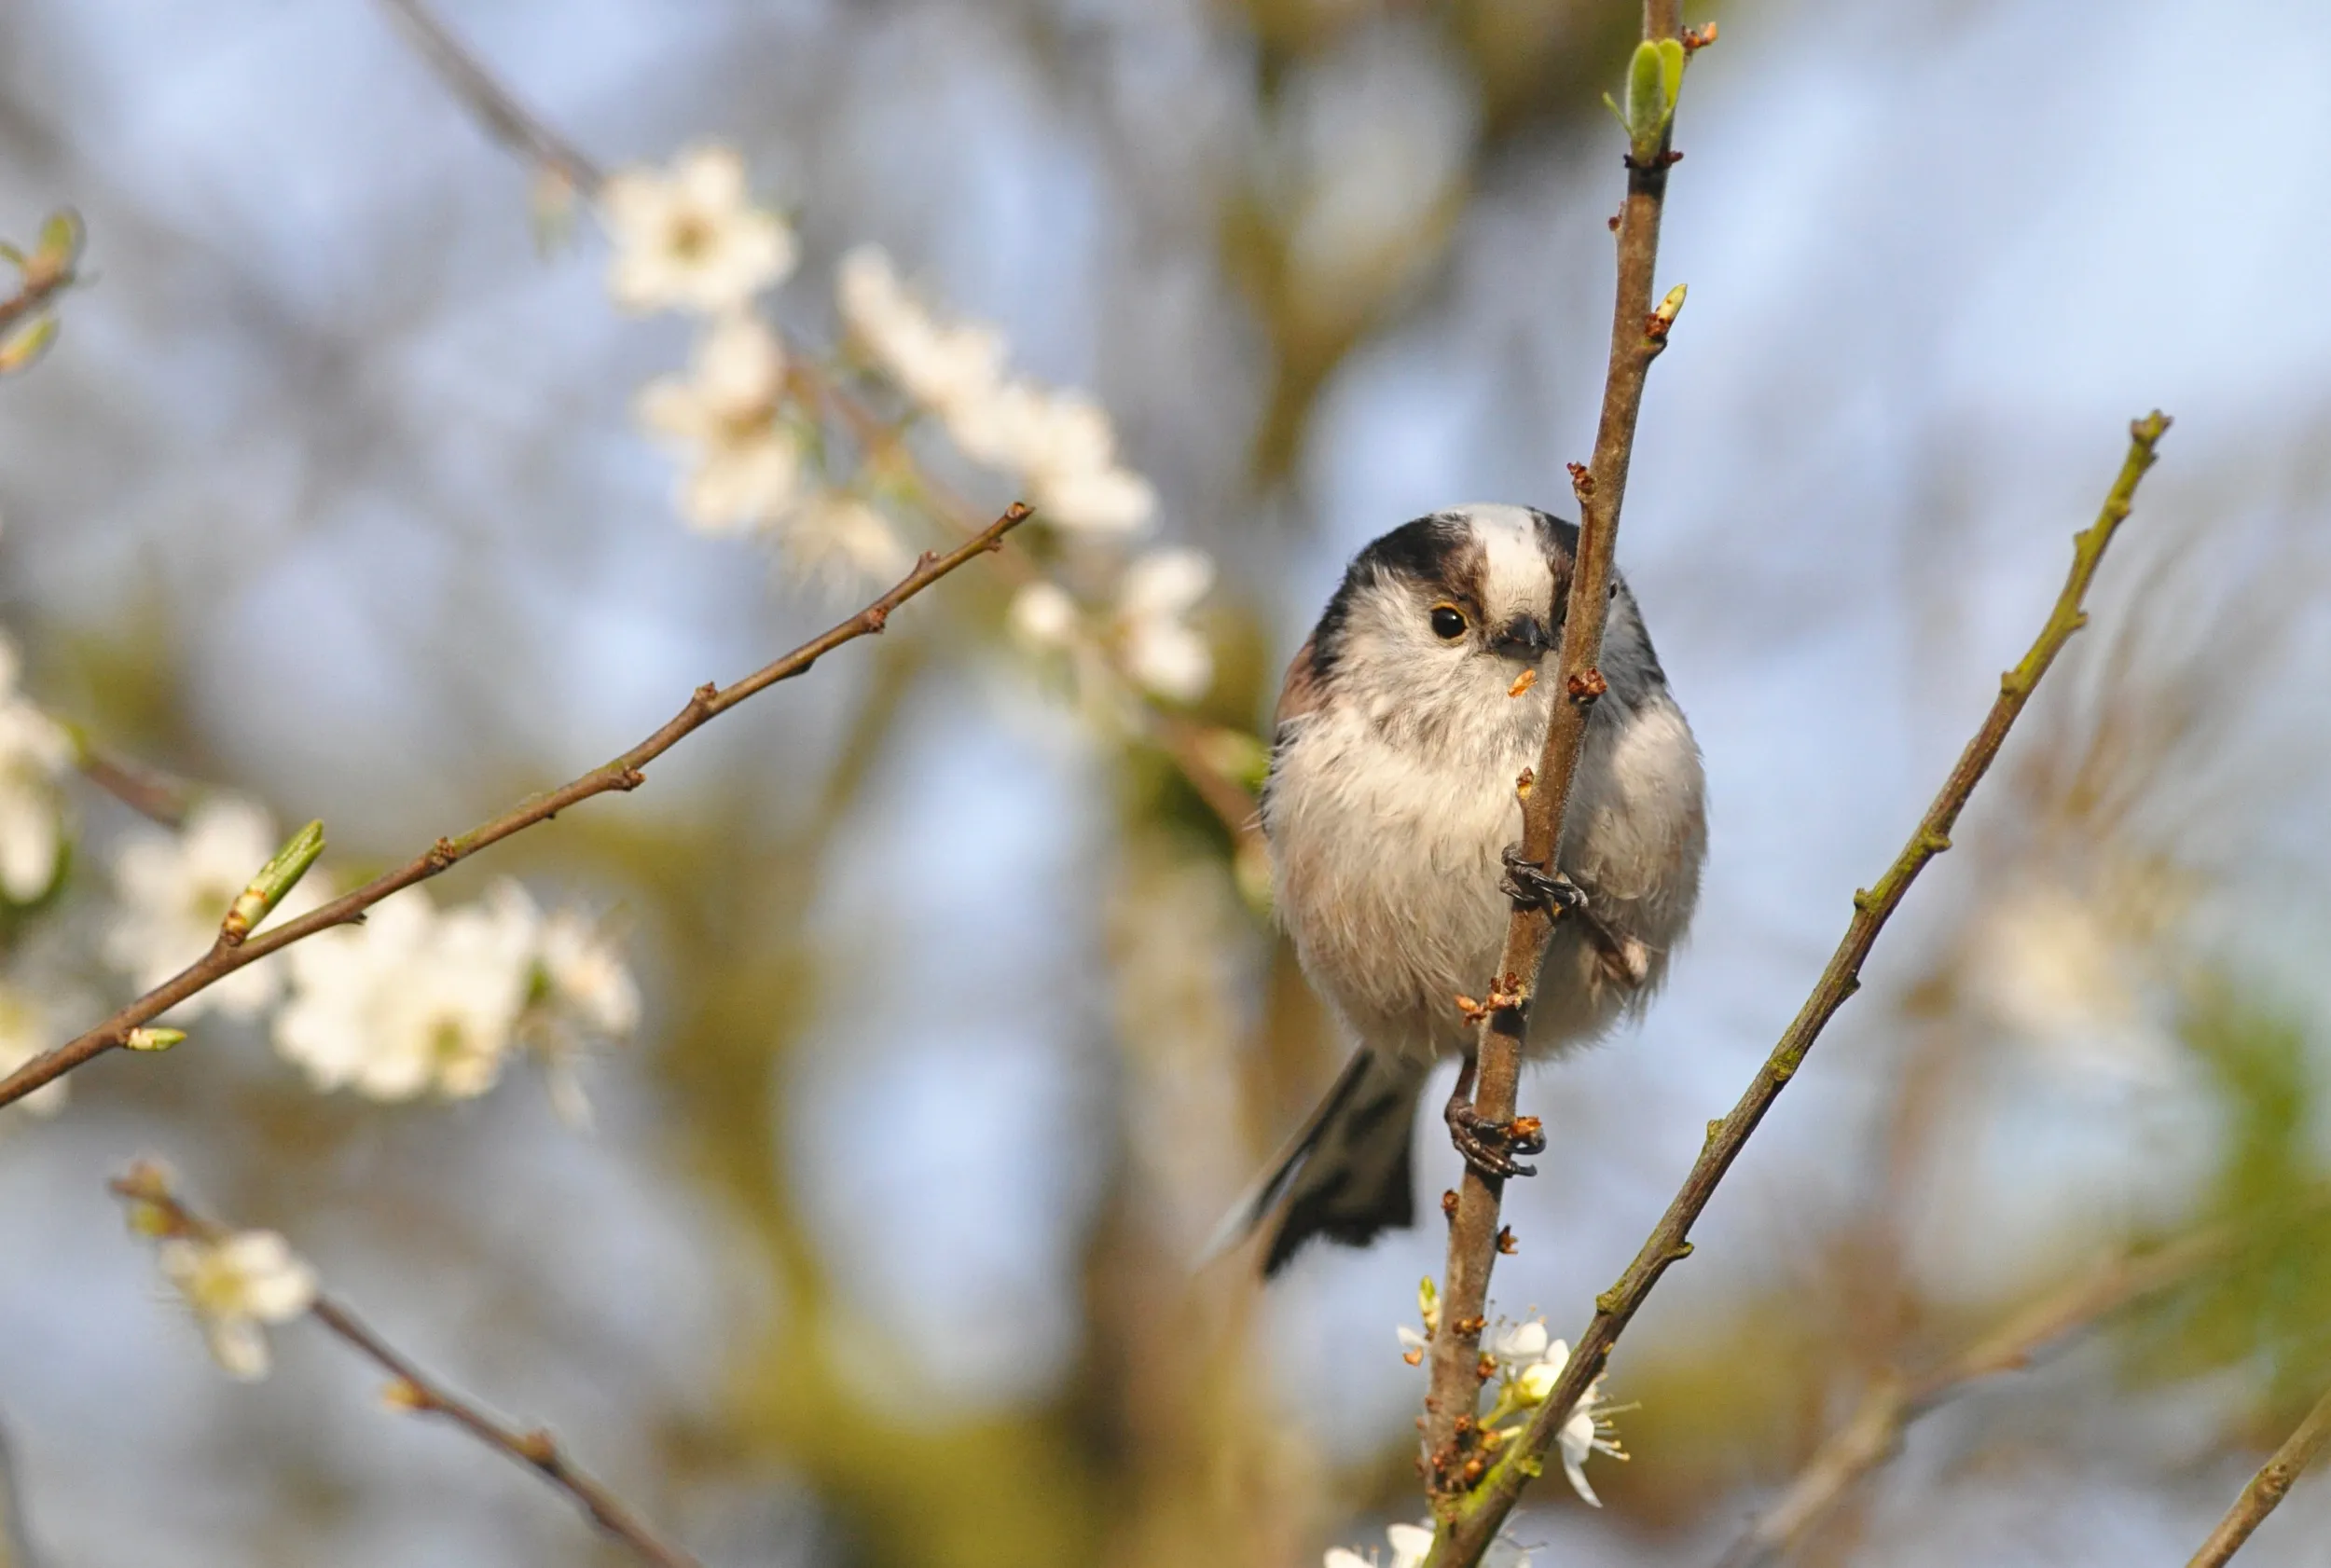 A Long-tailed Tit perched on a thin branch, with white blossom in the background